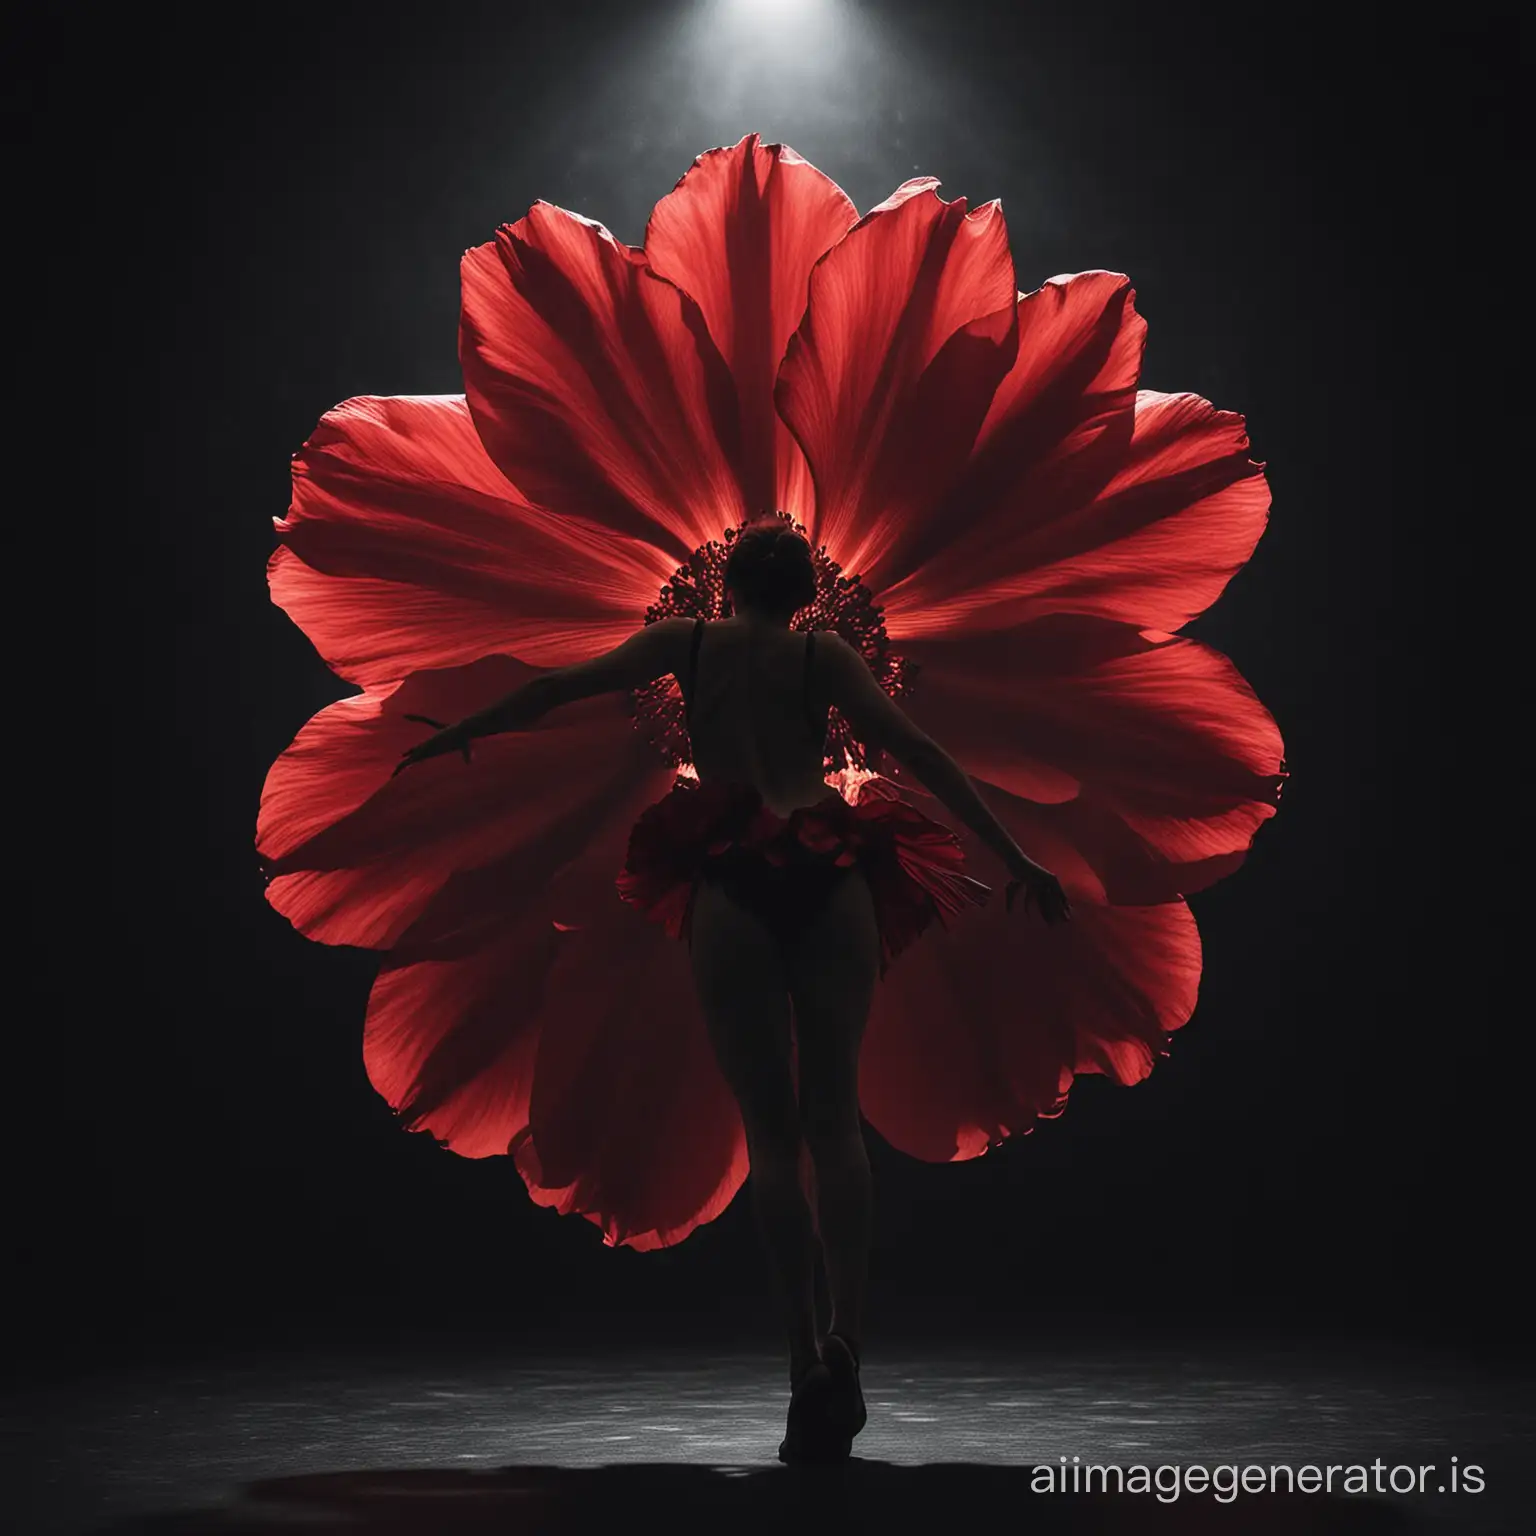 Enigmatic-Dancer-in-a-Noirinspired-Performance-with-a-Striking-Red-Flower